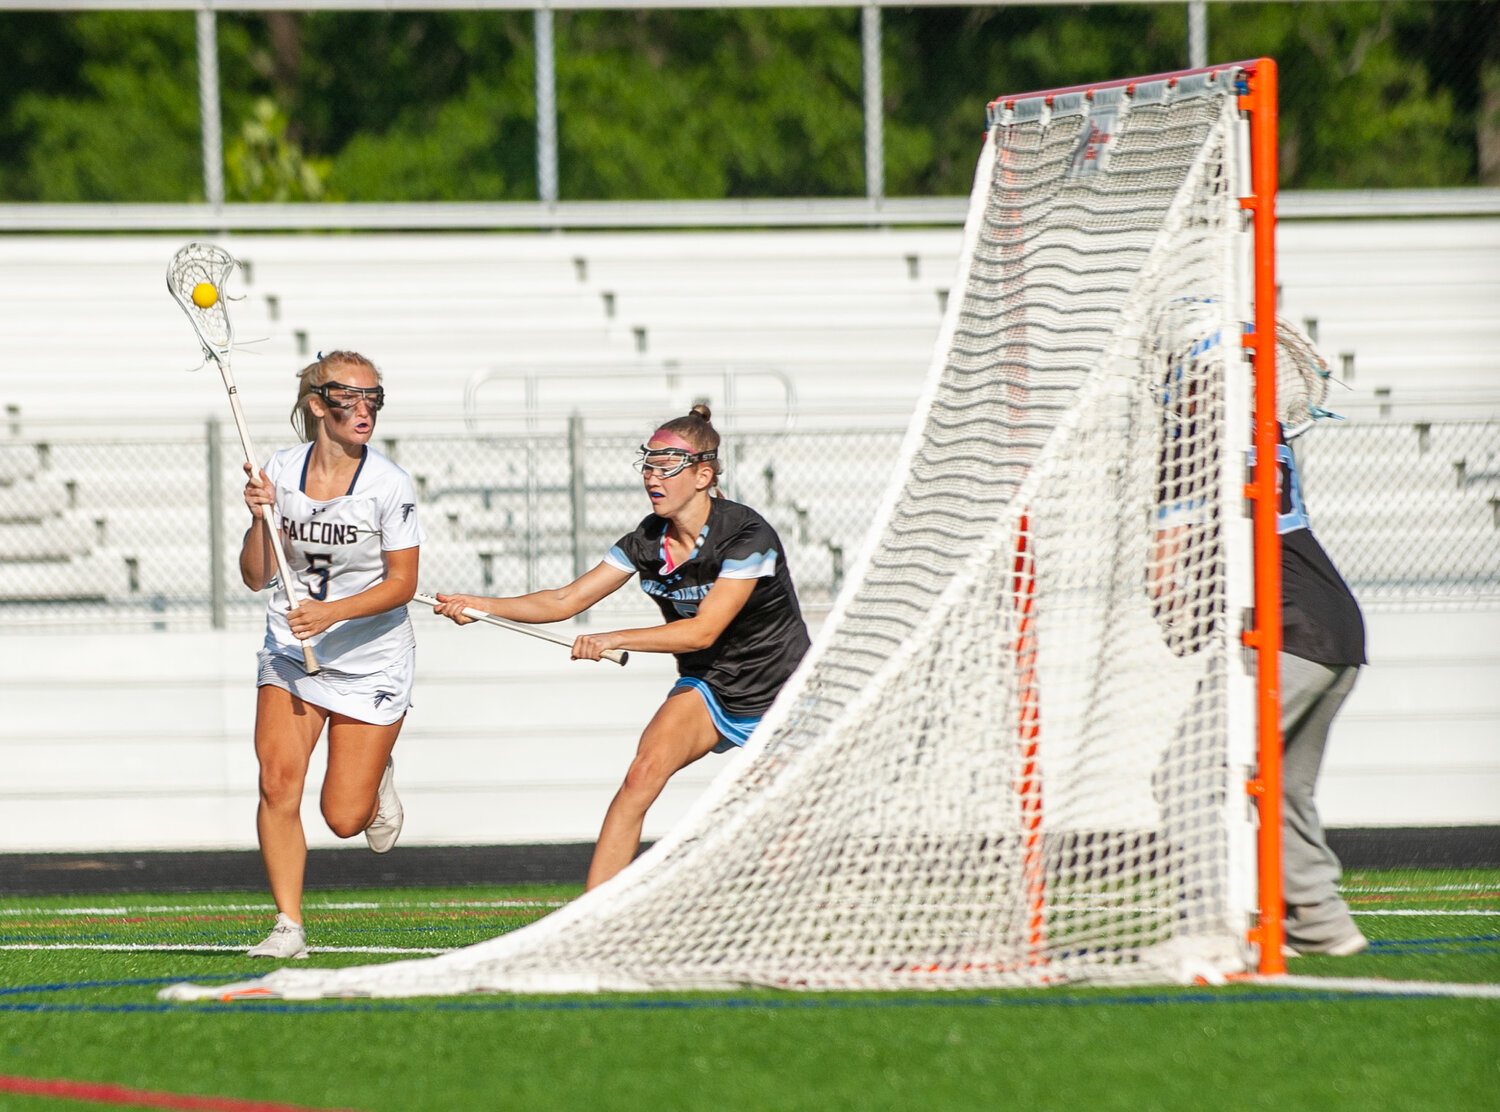 Charlotte Diez scored four times, including the last three in the final 30 seconds of regulation and overtime during the state semifinal against Westminster.